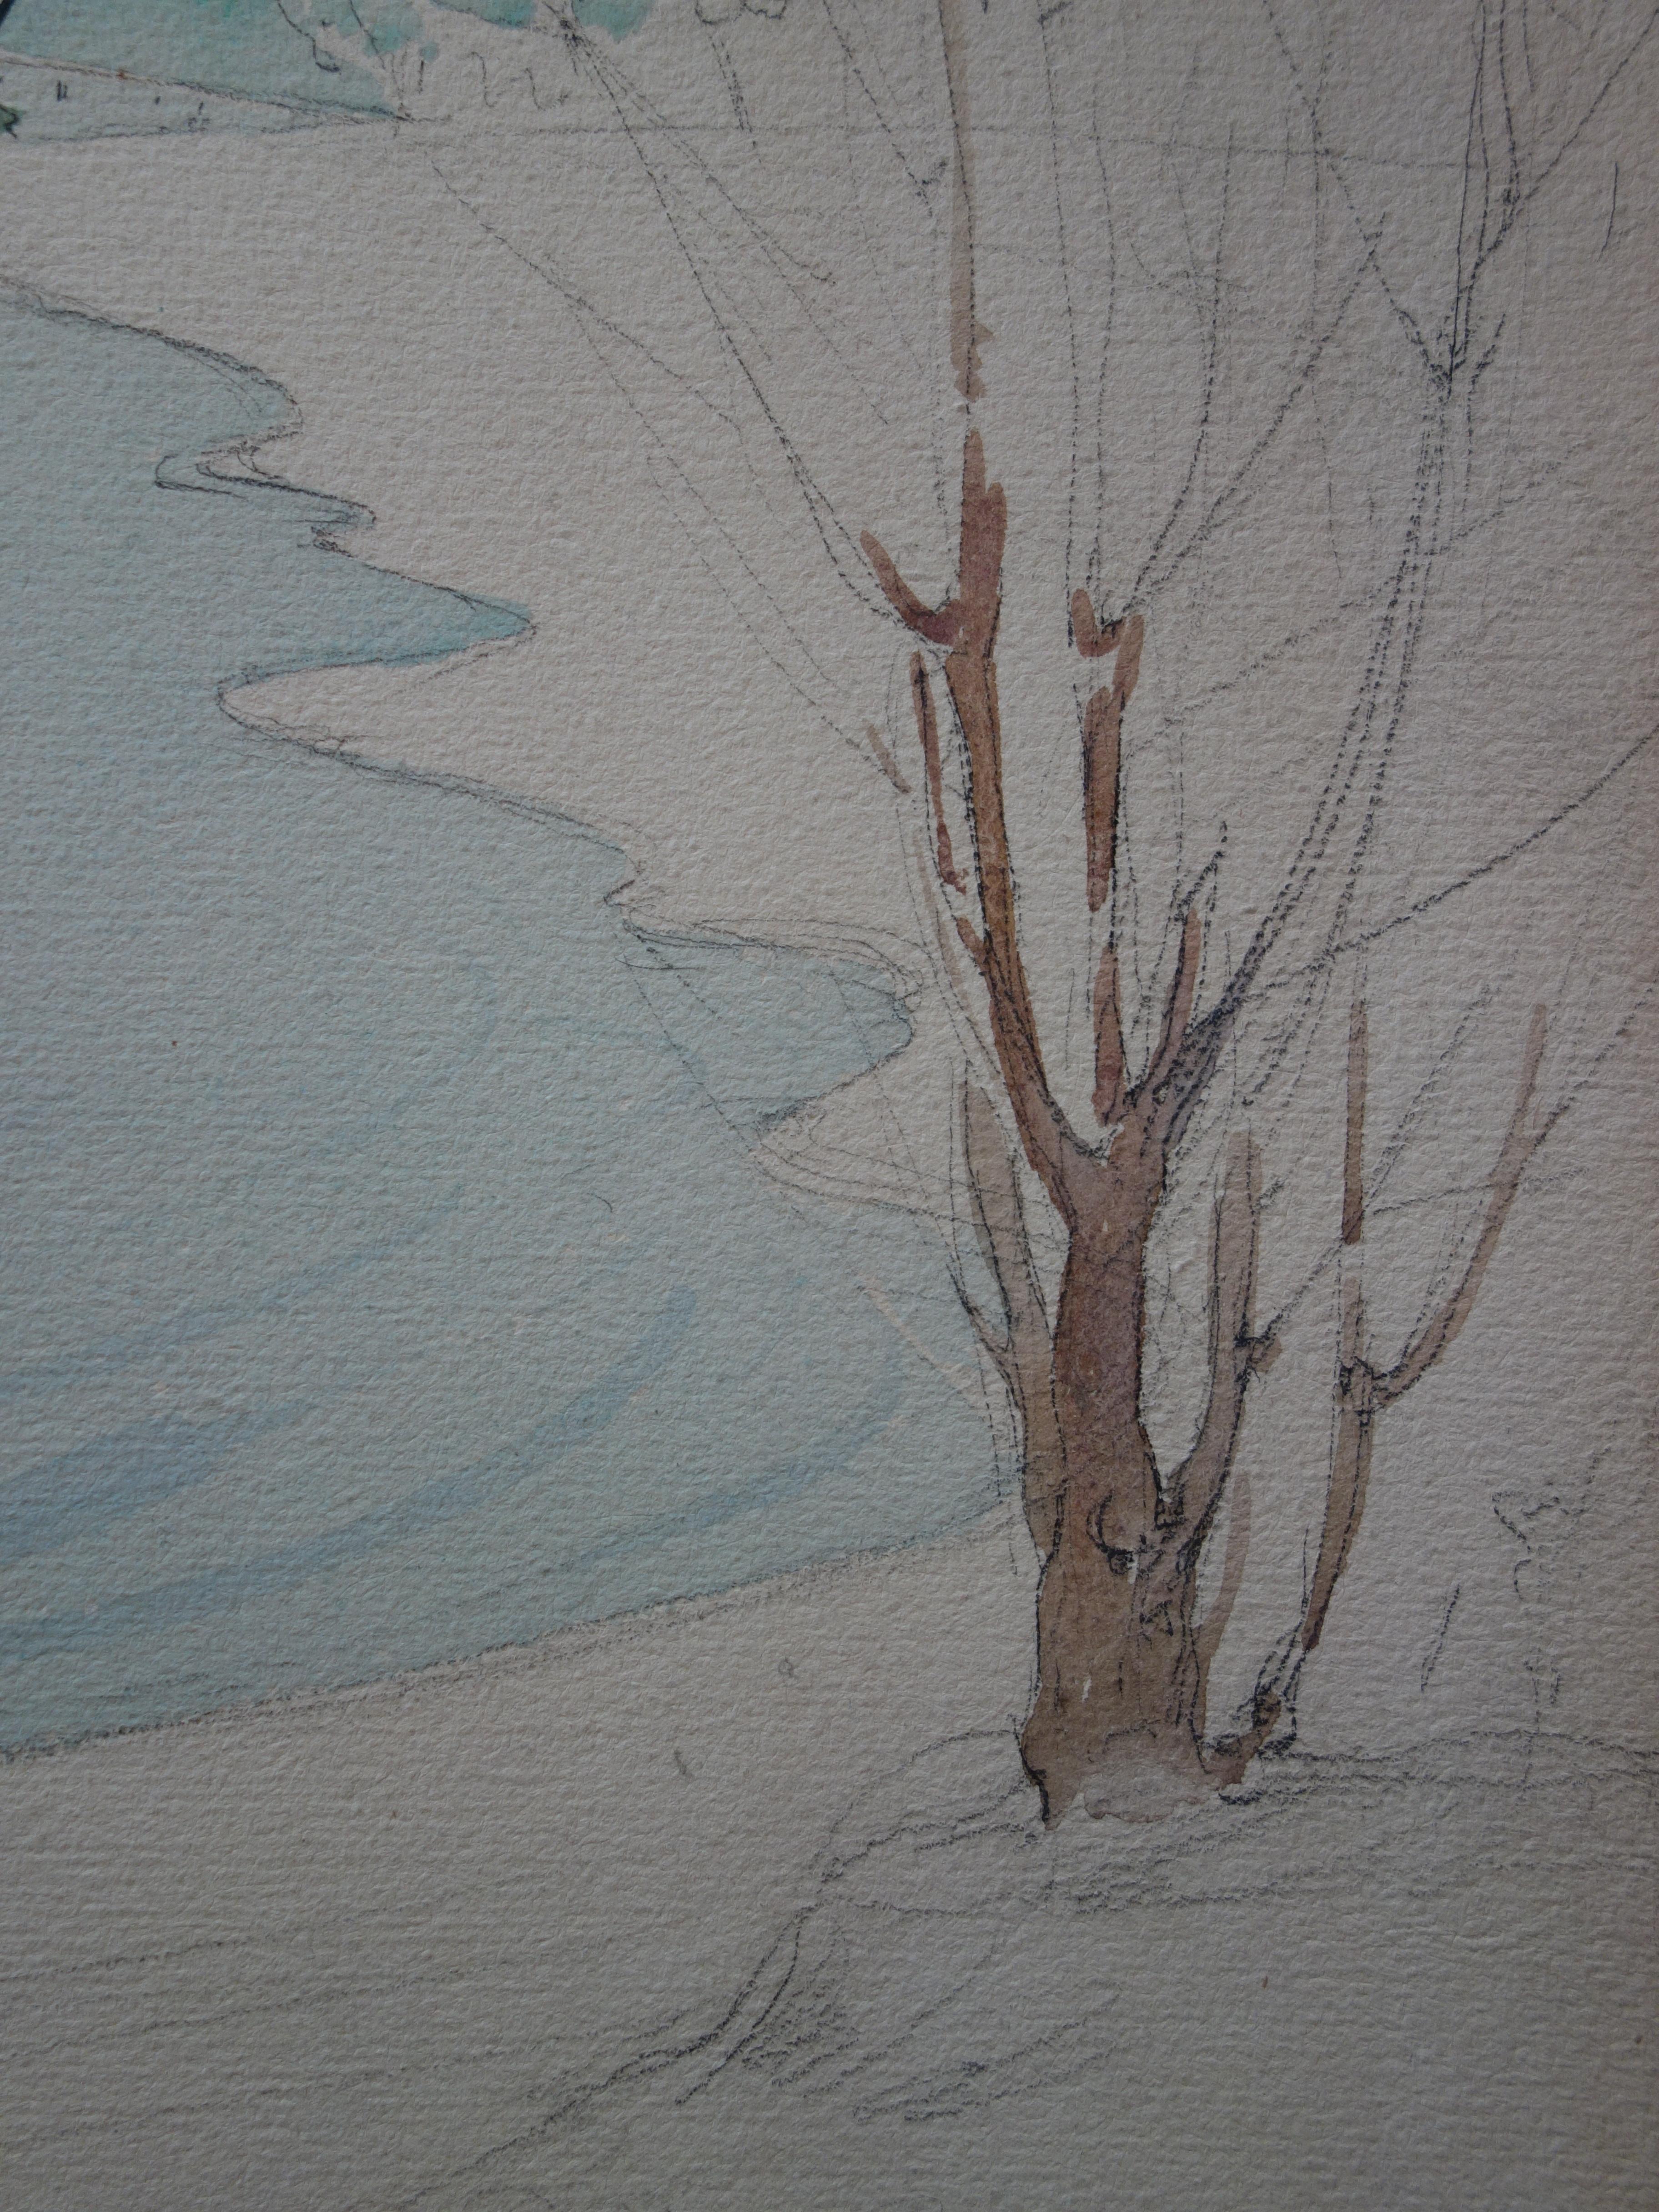 The Lake During Winter - Original Watercolor and Charcoals Drawing  - Realist Art by Gustave Poetzsch